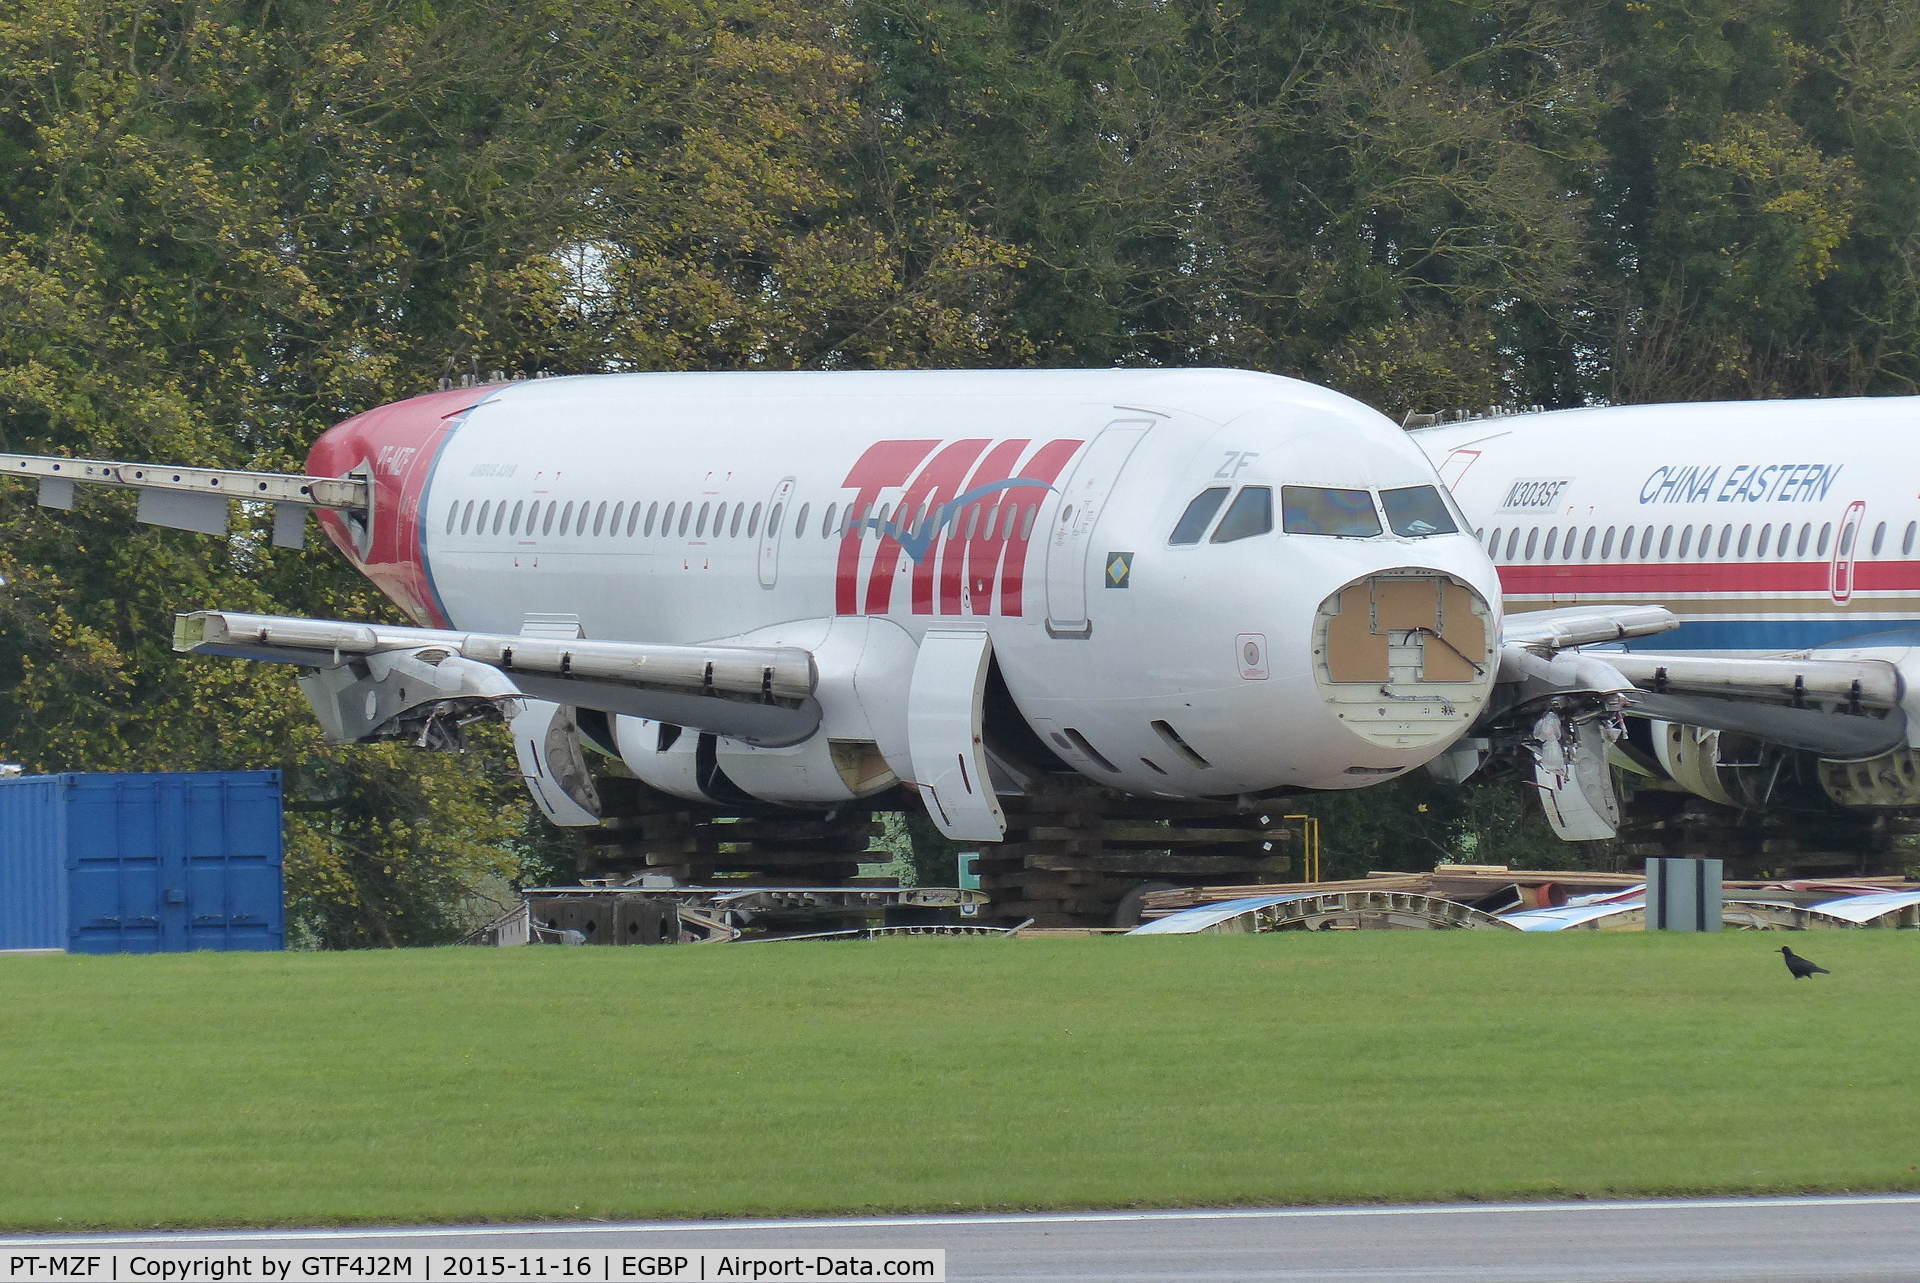 PT-MZF, 1999 Airbus A319-132 C/N 1139, PT-MZF in the scrap line at Kemble 16.11.15